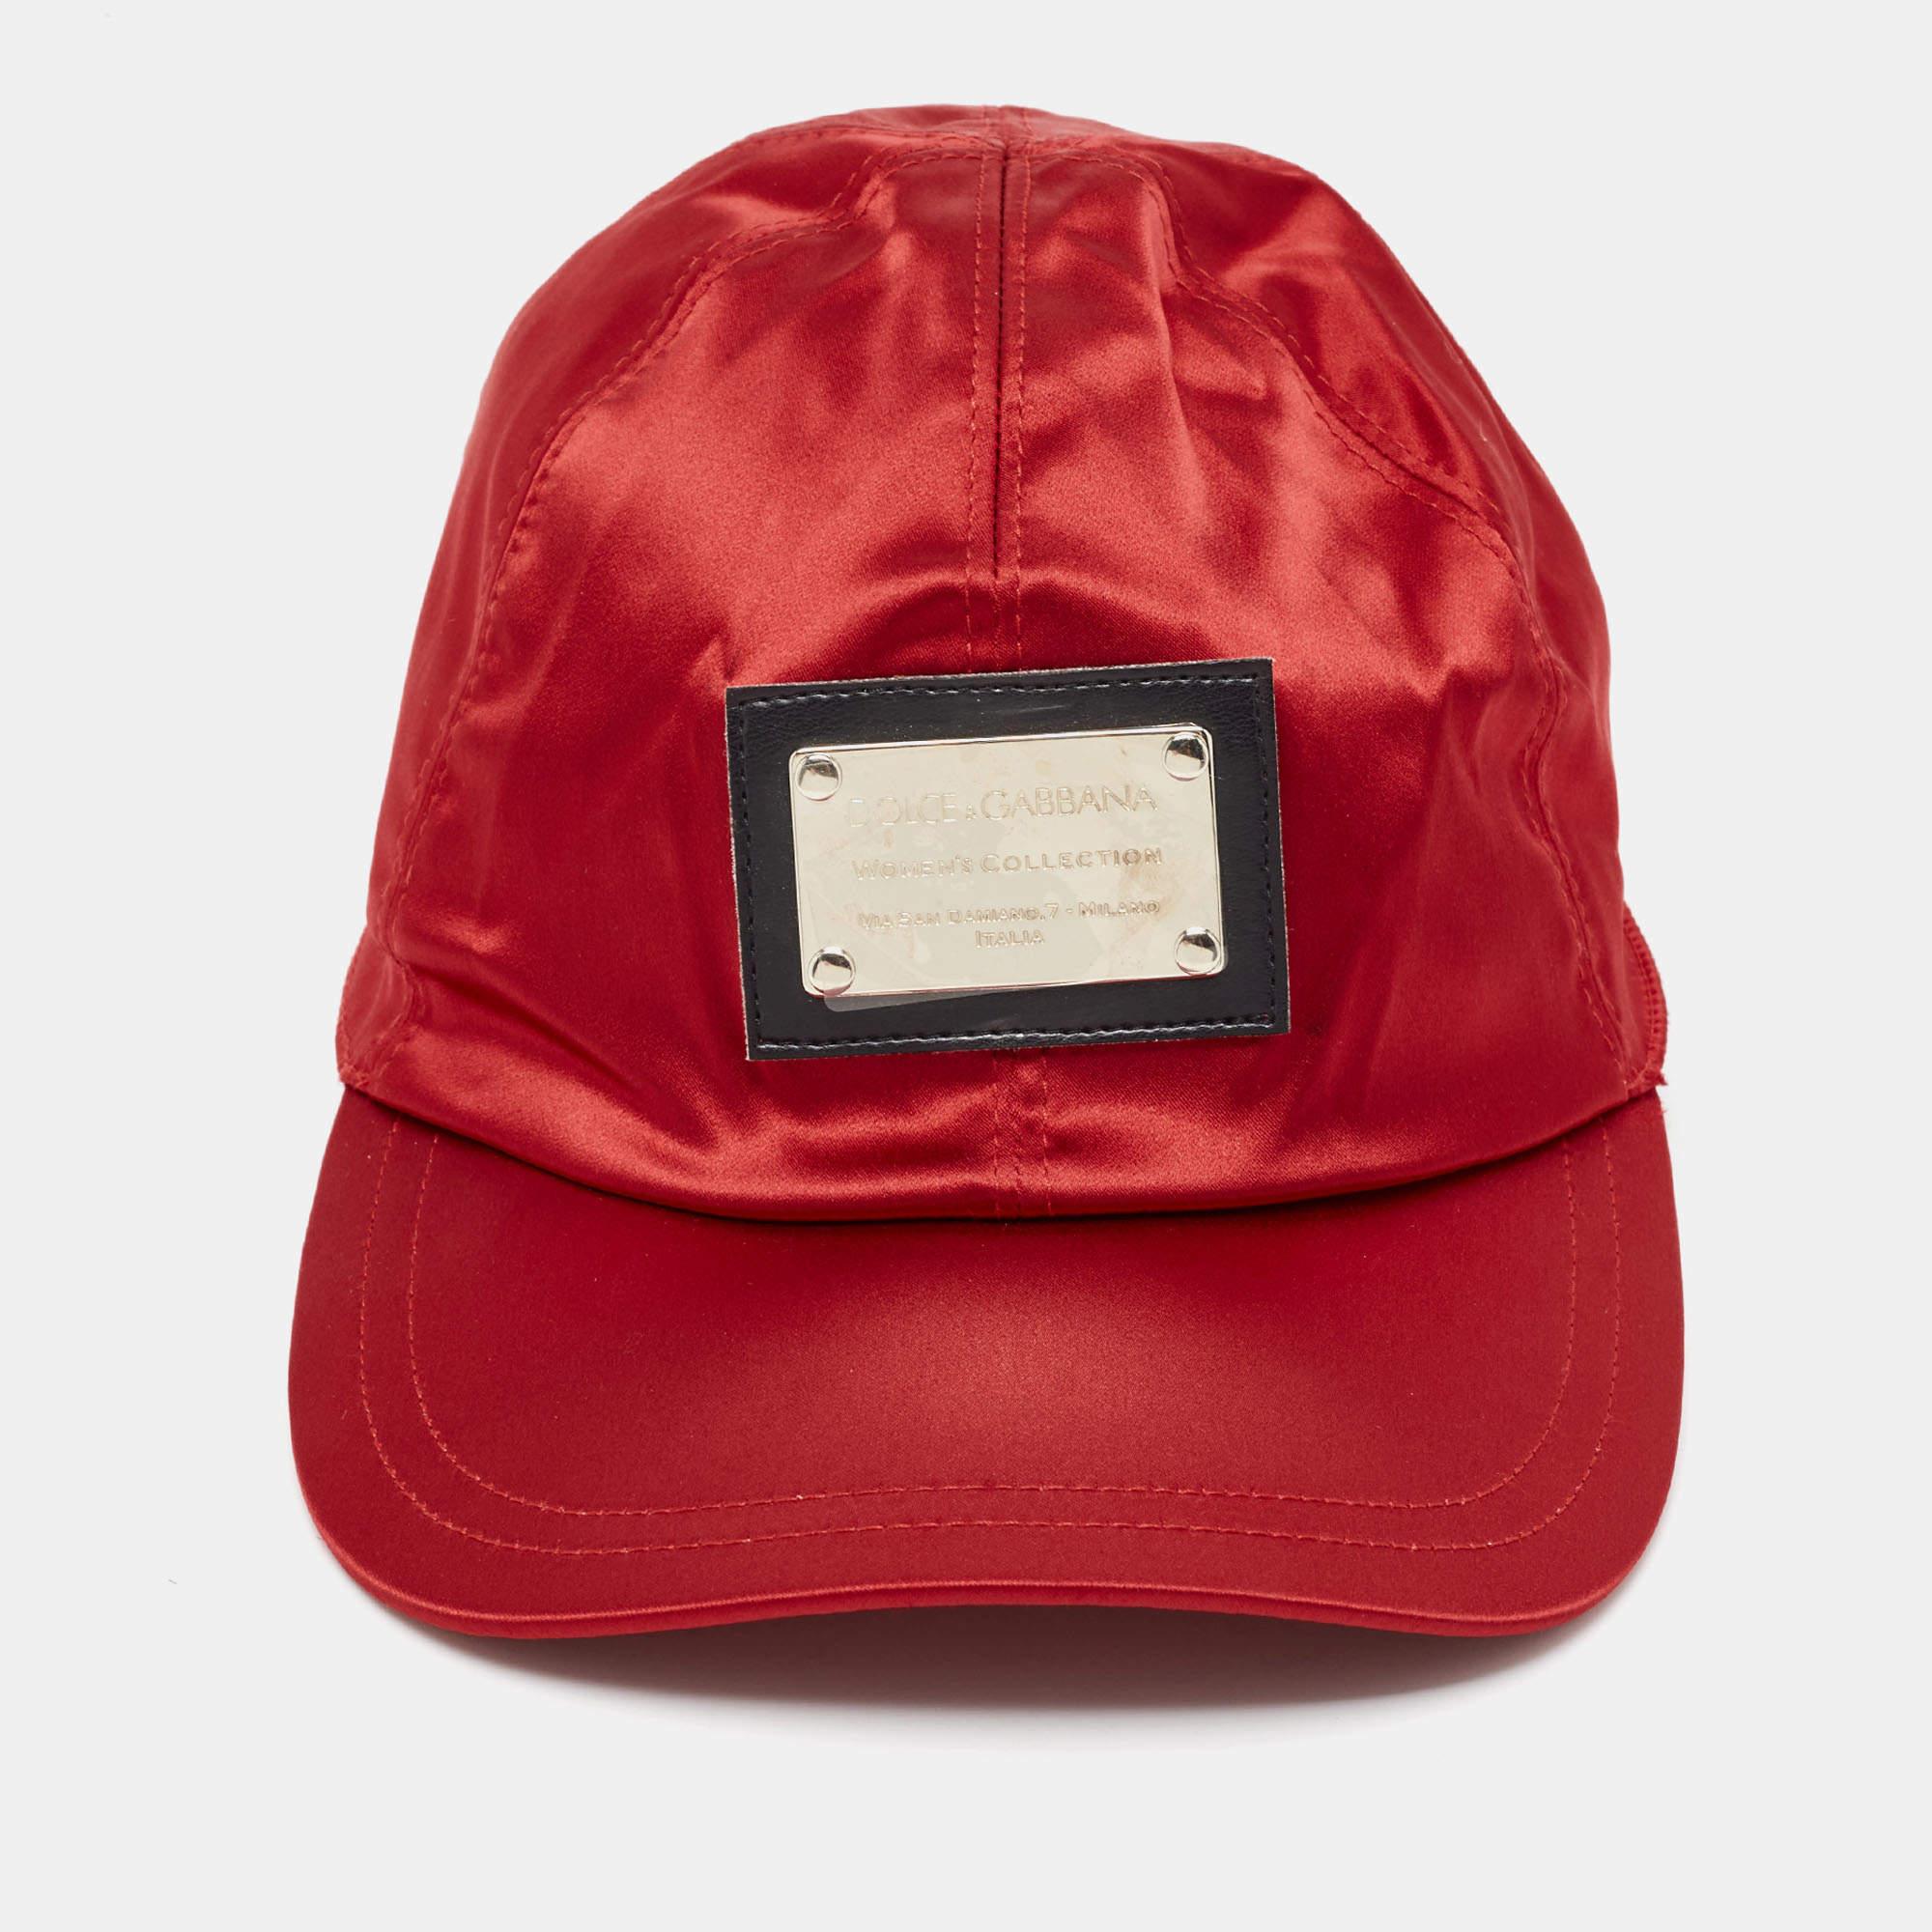 Caps are an ideal style statement with casual outfits. This Dolce & Gabbana piece is made from quality materials and features signature elements. This piece will be a smart addition to your cap collection.

Includes: Brand Tag